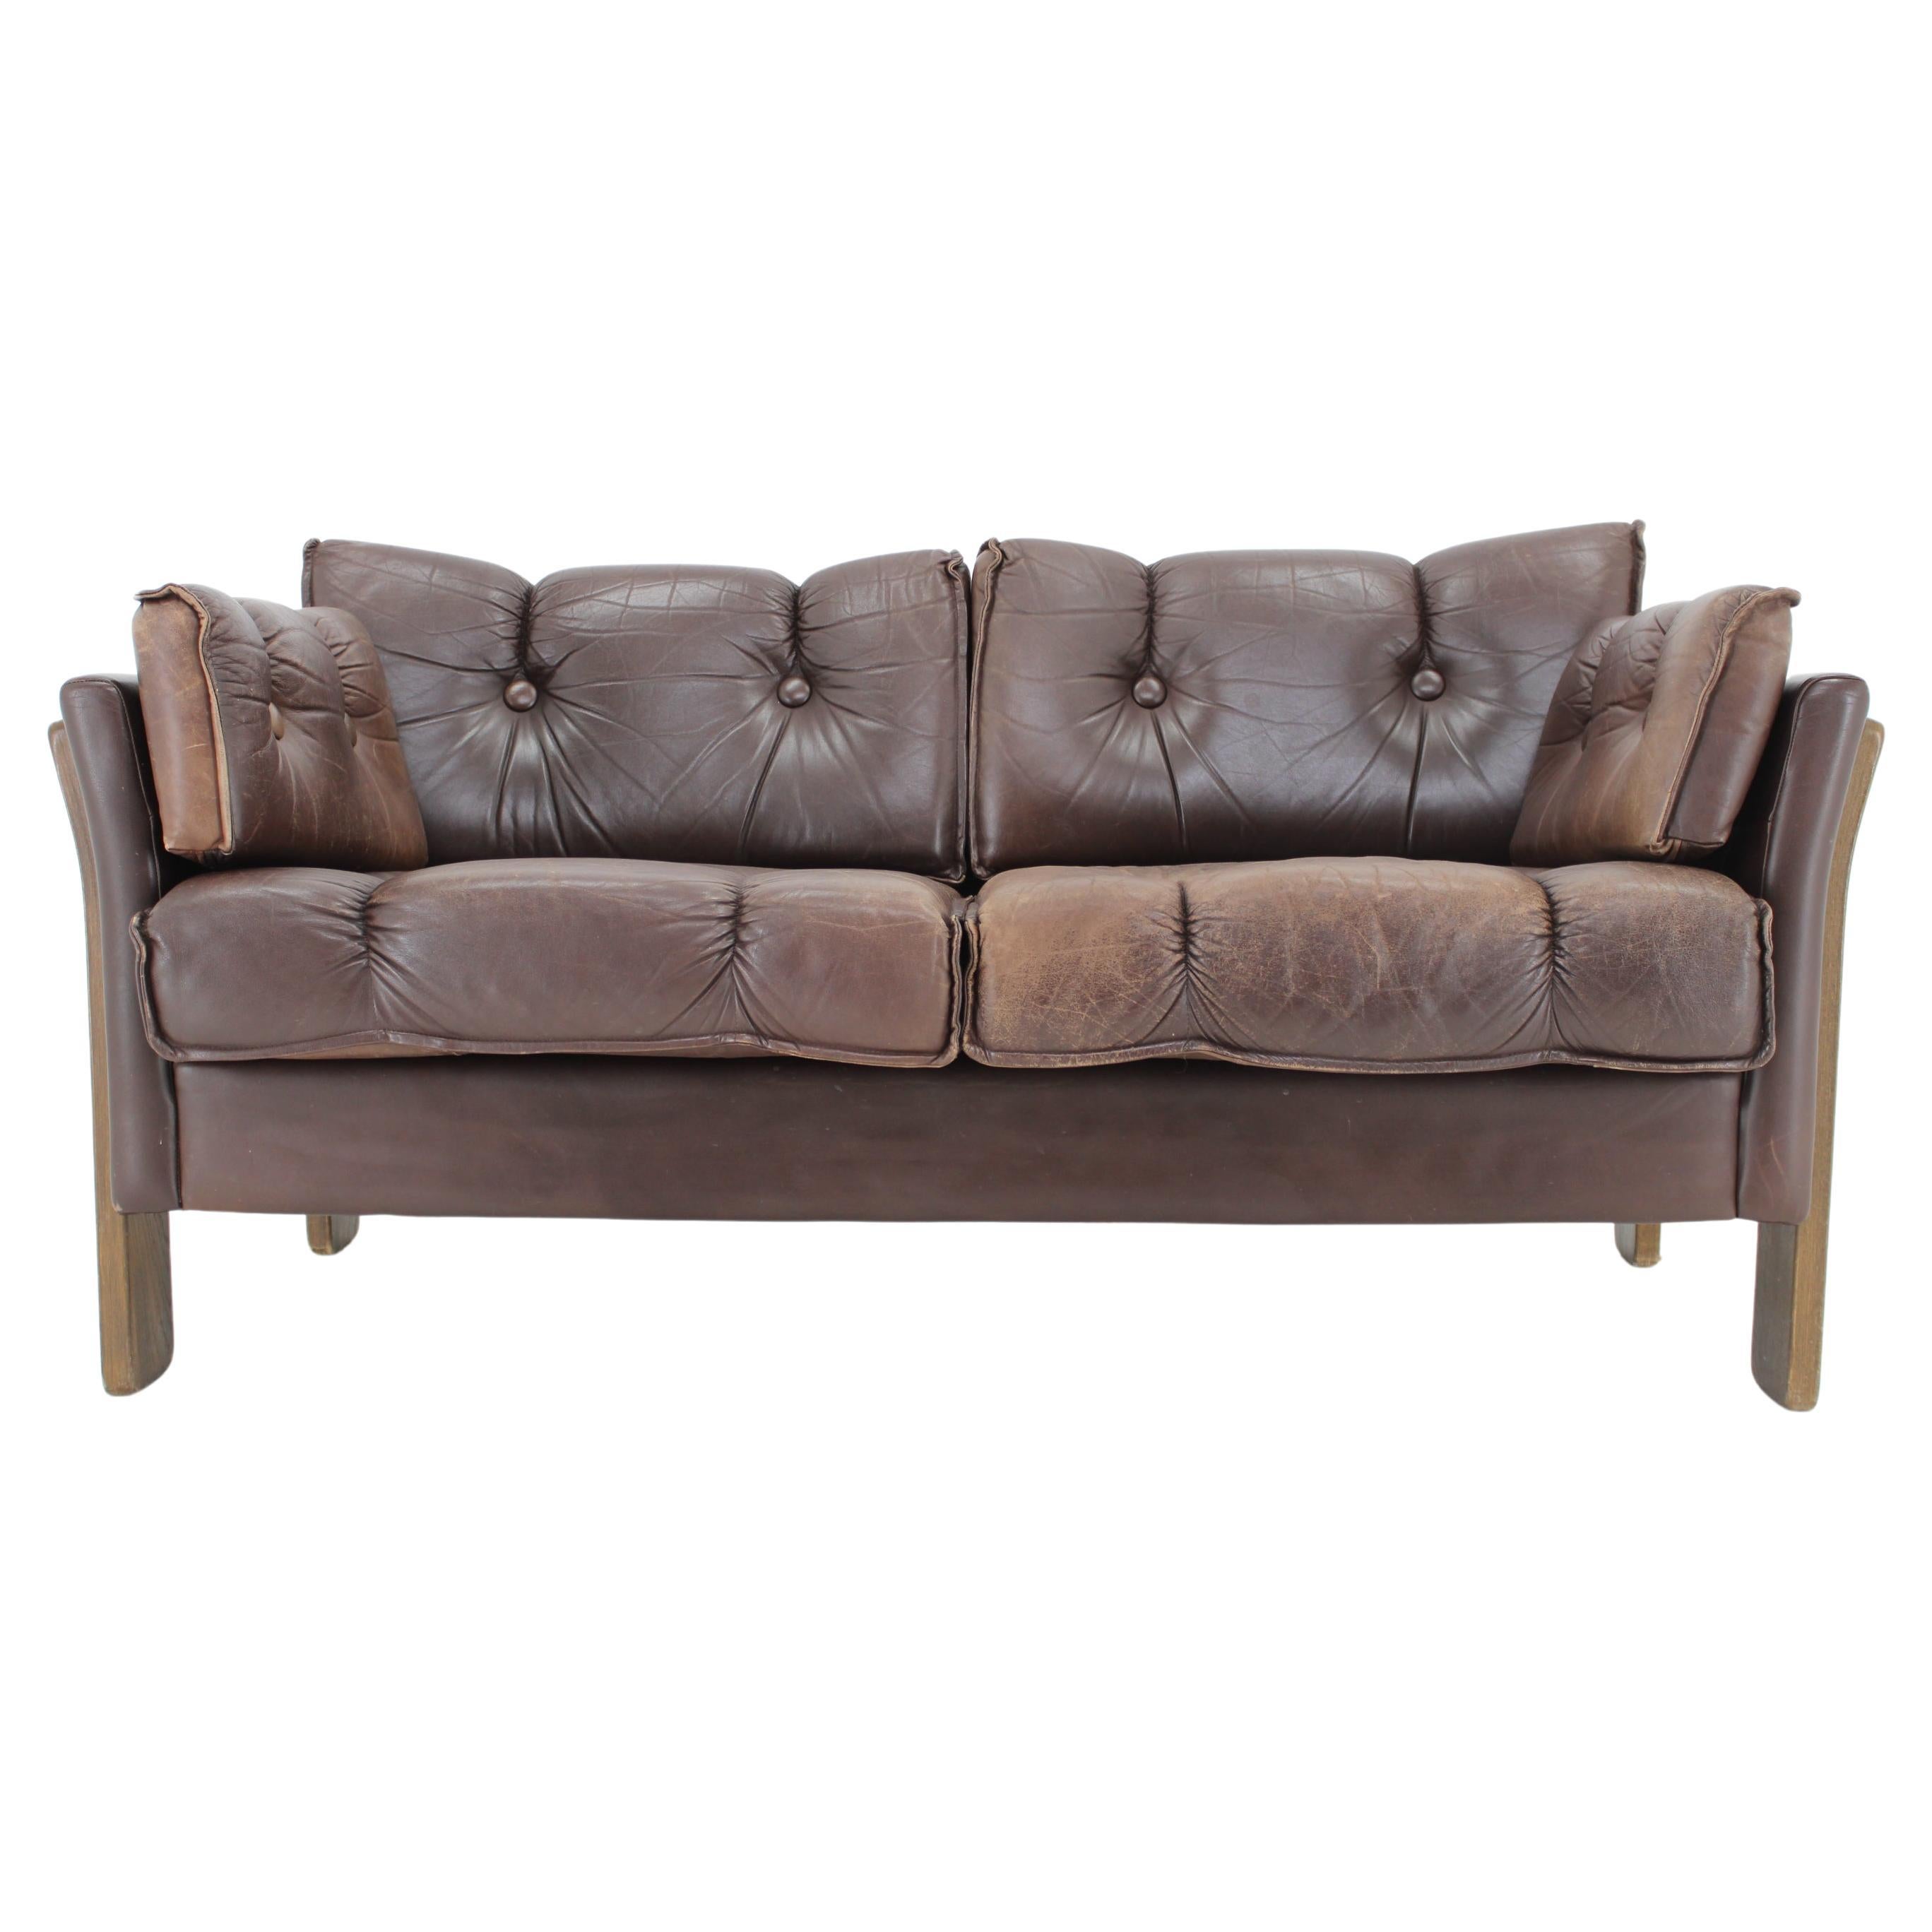 1970s Brown Leather 2-Seater Sofa, Denmark For Sale